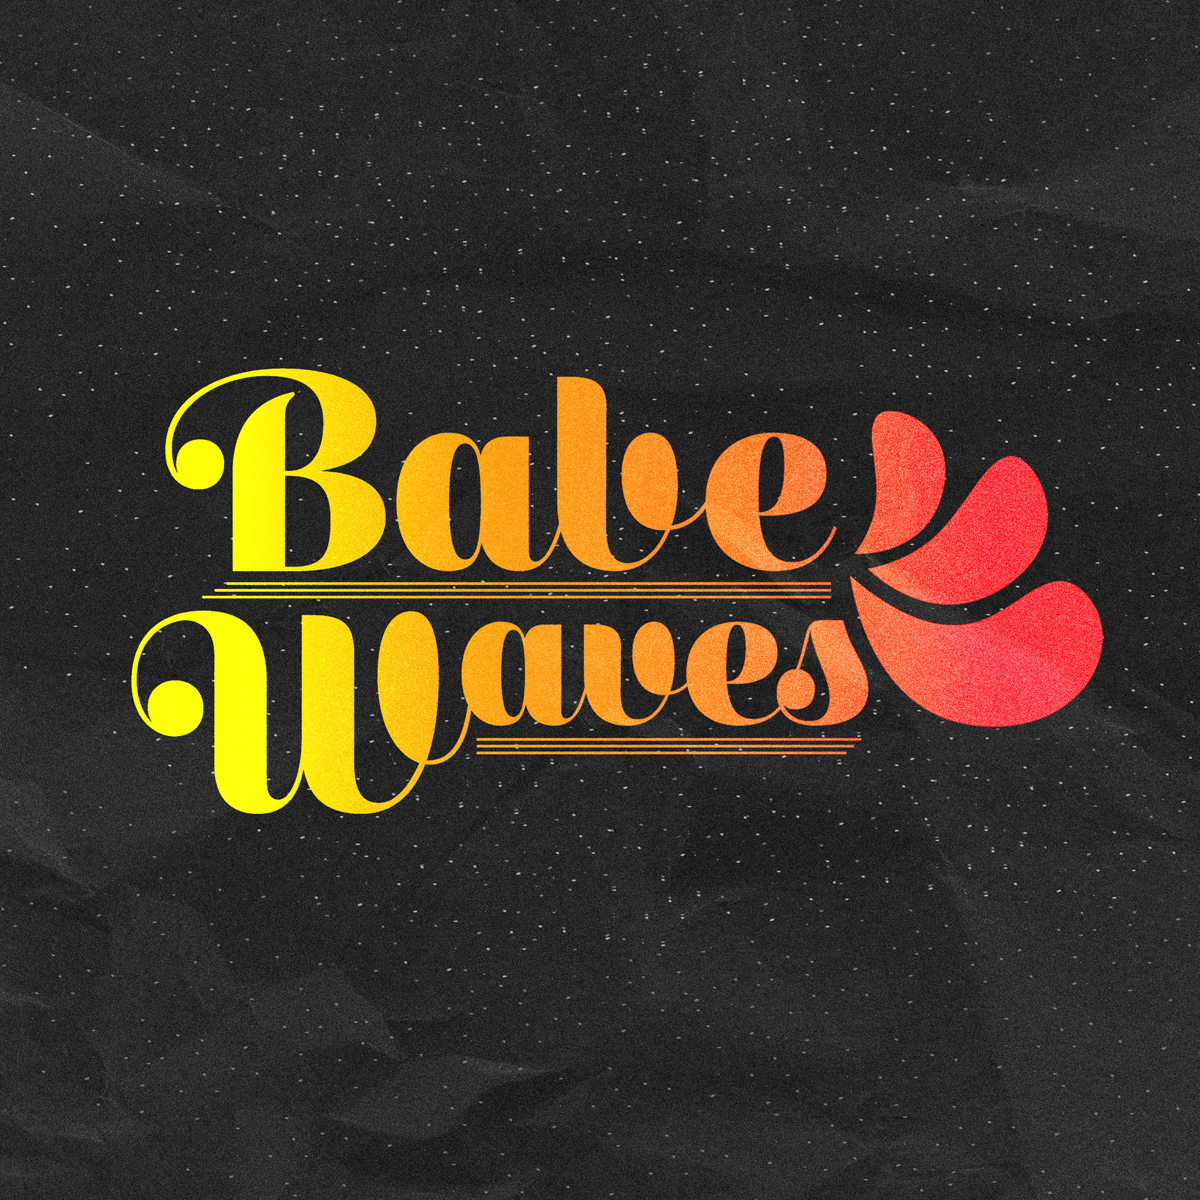  Logo for the band Babe Waves. 